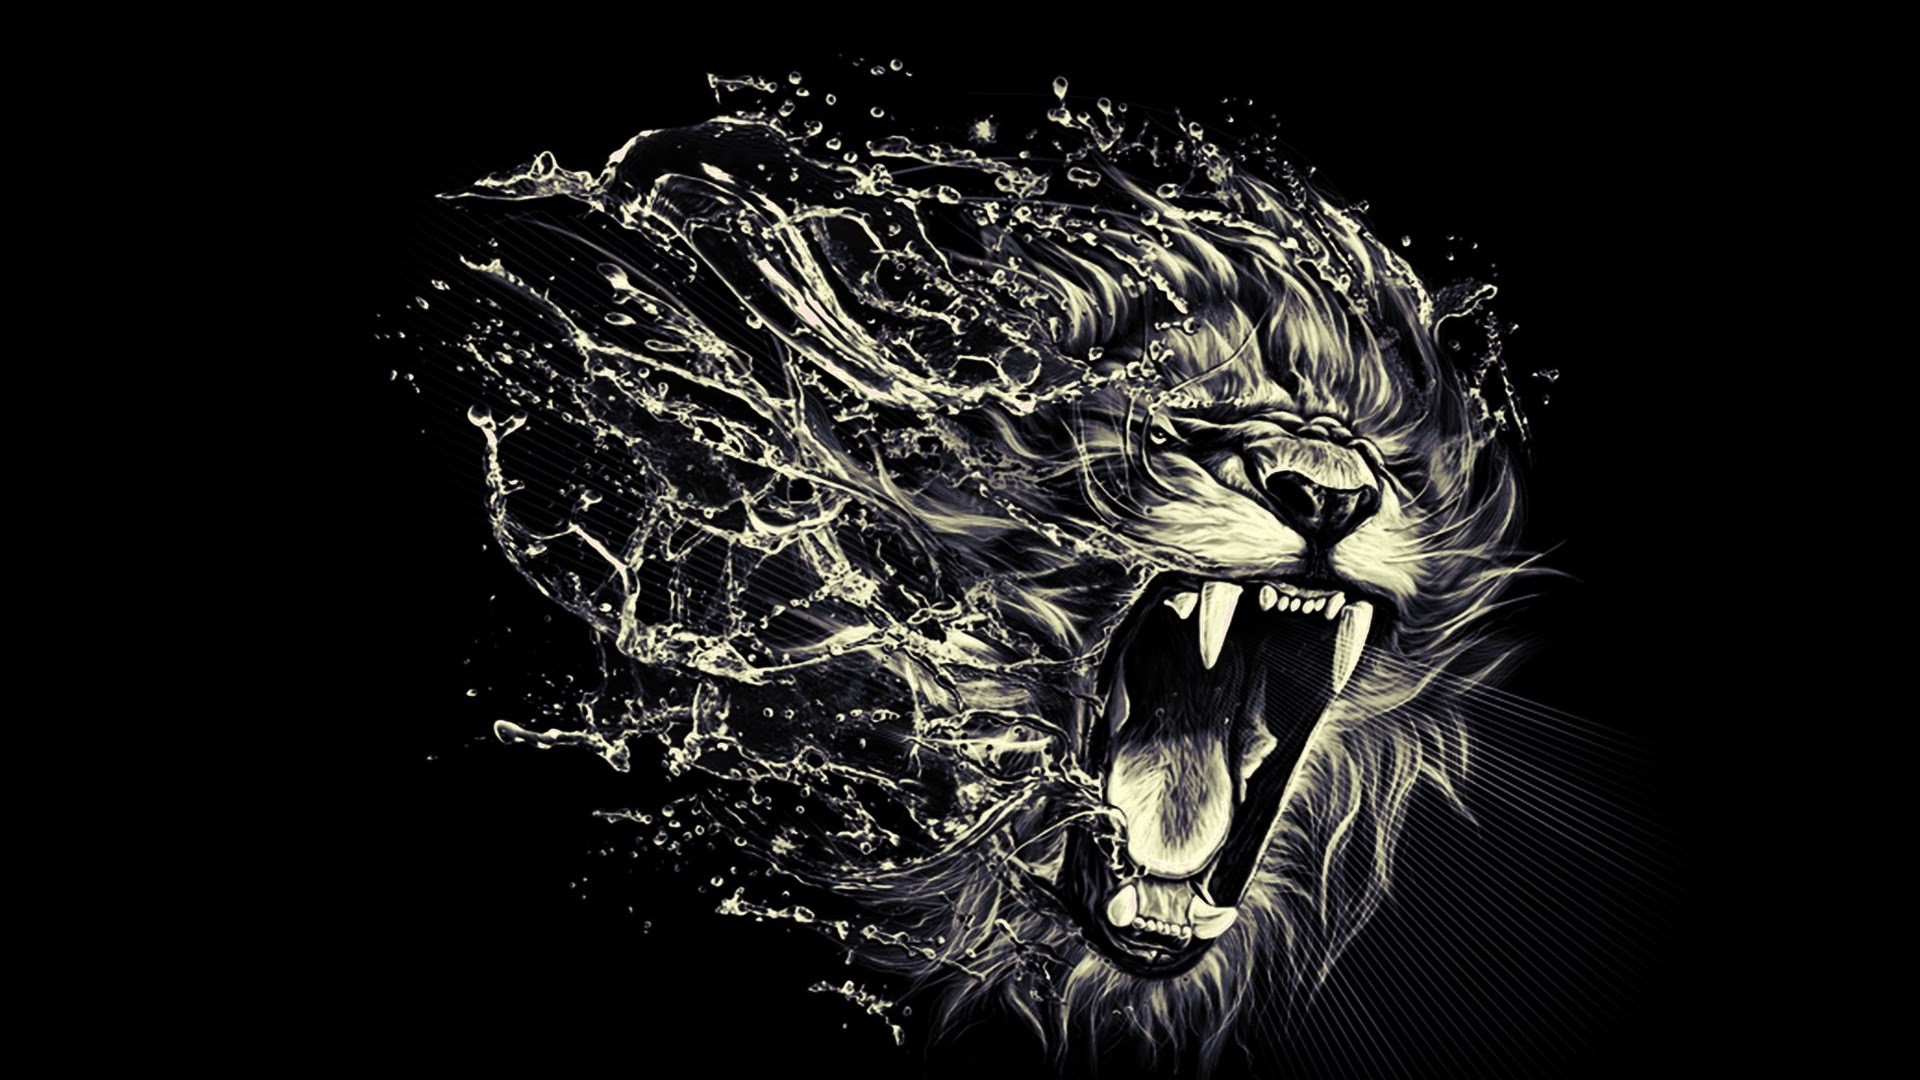 Best 25 Lion hd wallpaper ideas on Pinterest Lion images, Lion tattoo images and Pretty phone wallpaper